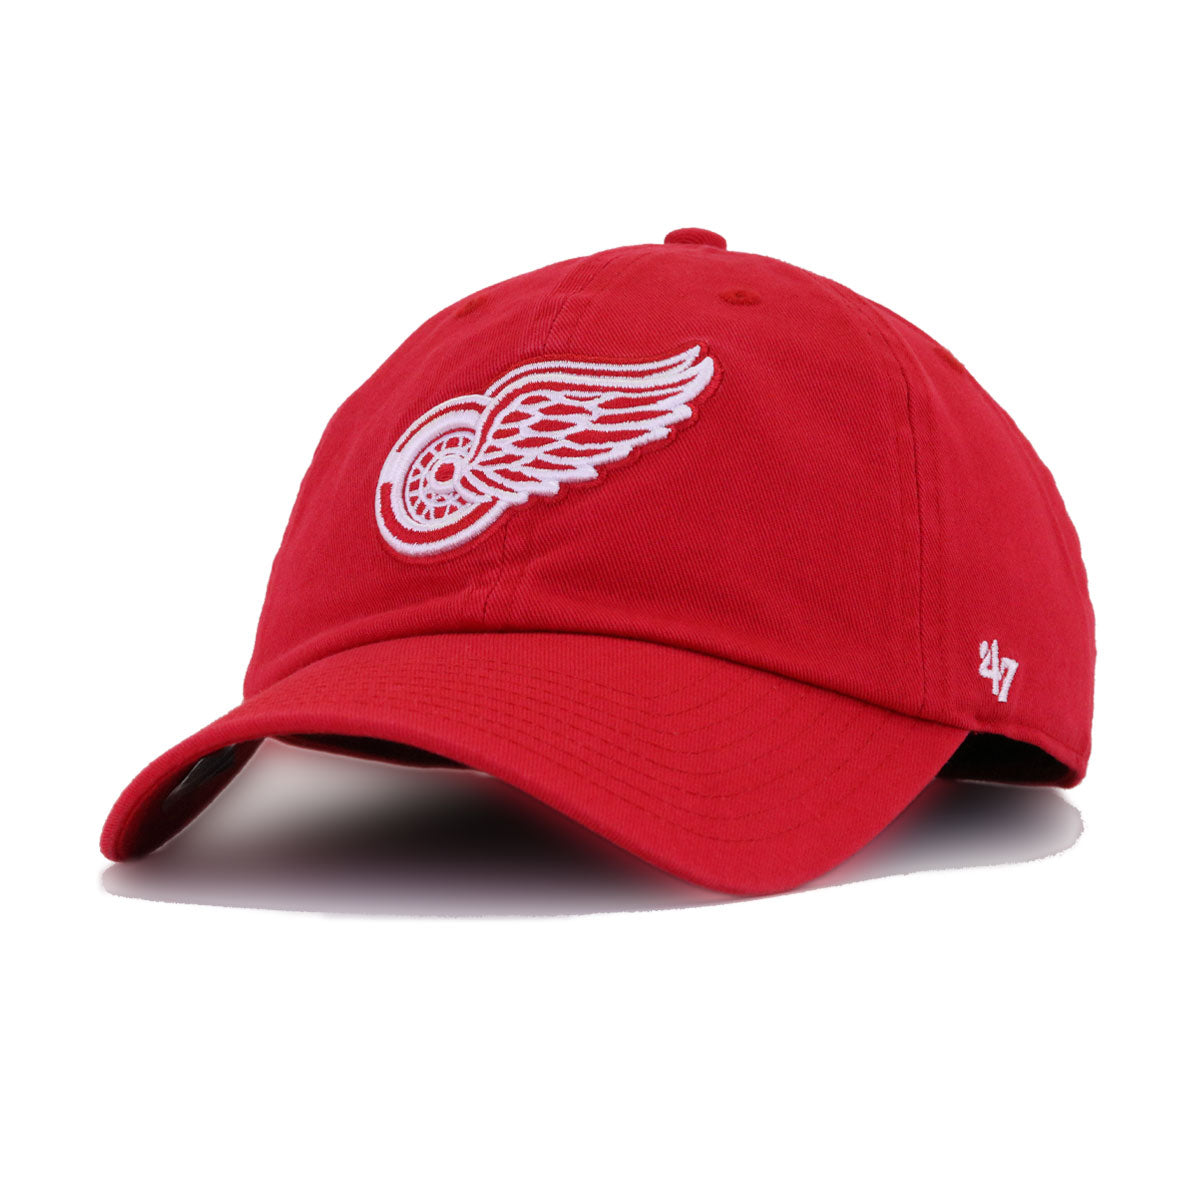 Detroit Red Wings Cap by 47 Brand